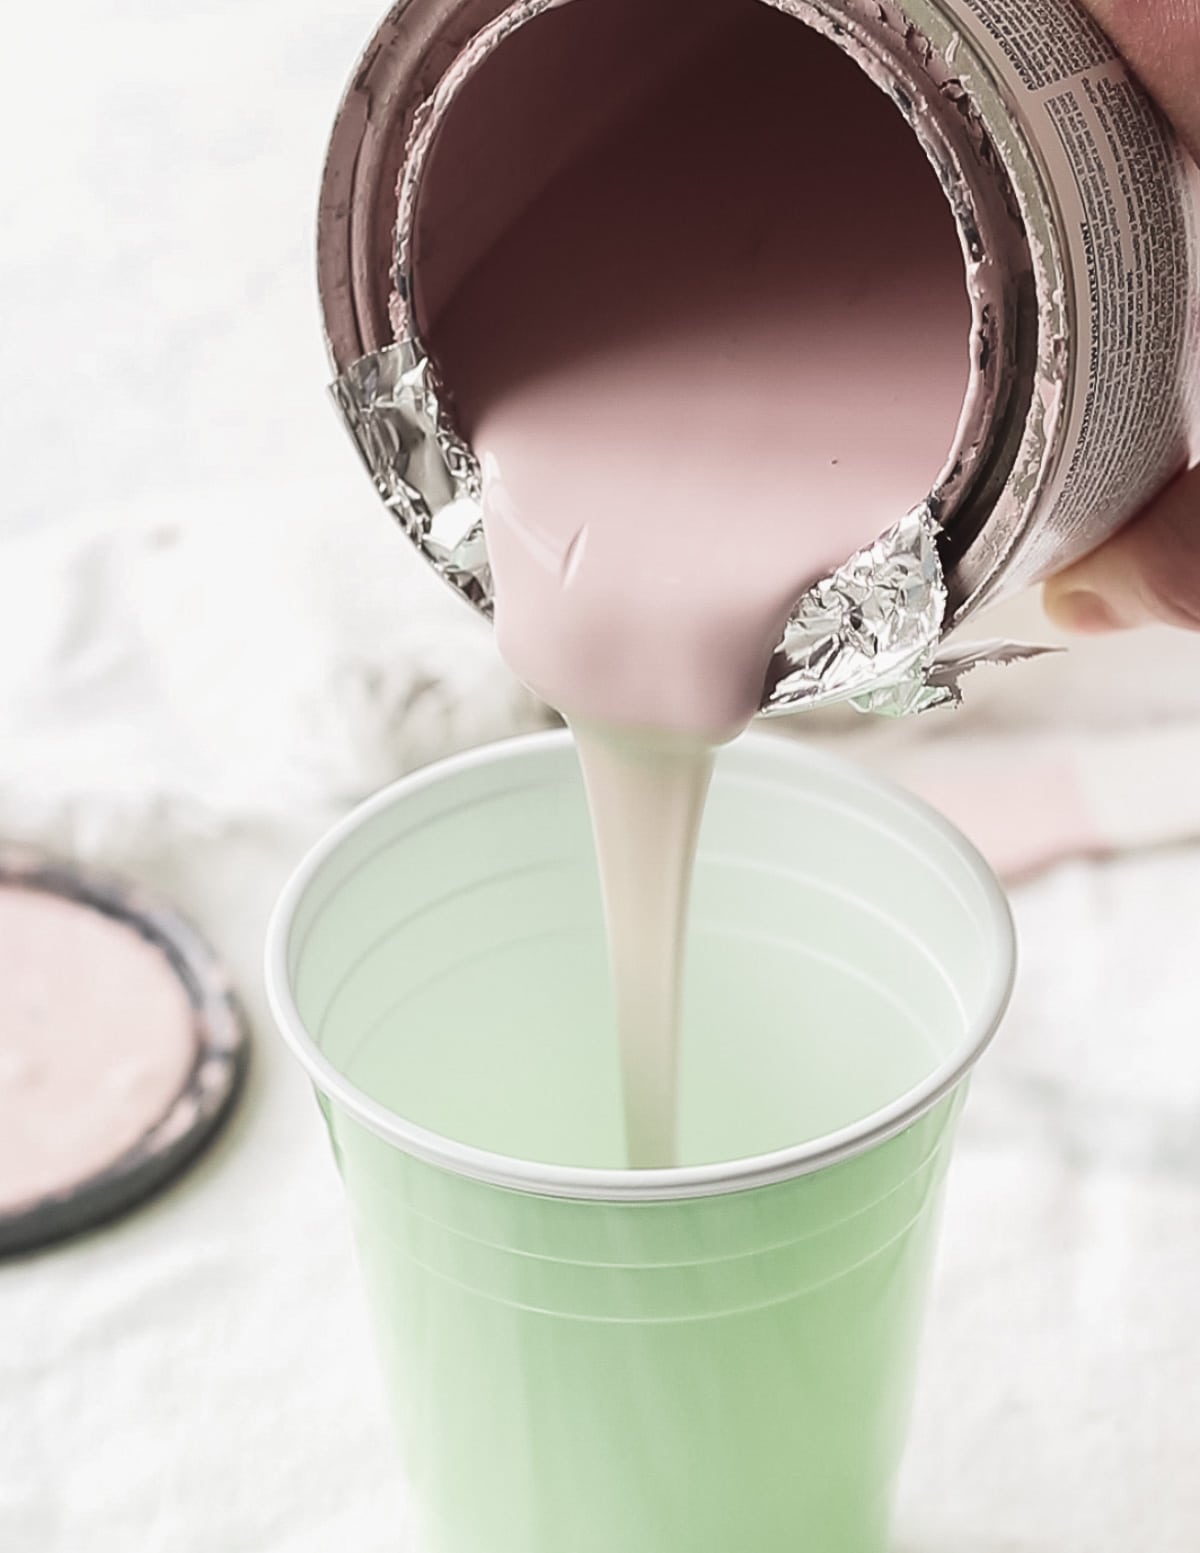 Chalk Paint Too Thick? How to Thin Chalk Paint